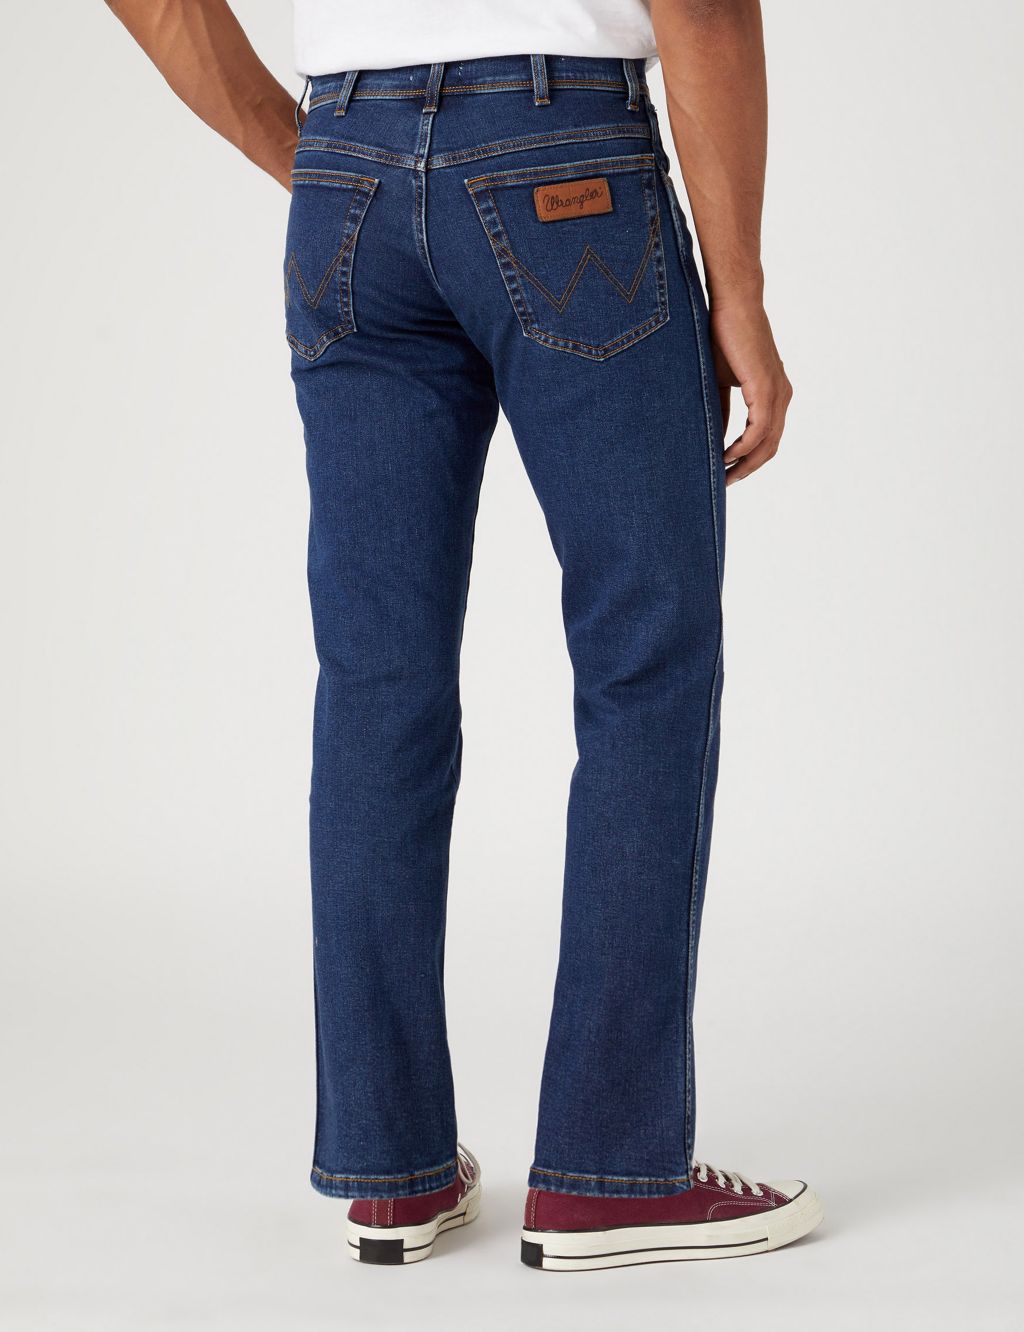 Texas Authentic Straight Fit 5 Pocket Jeans image 2